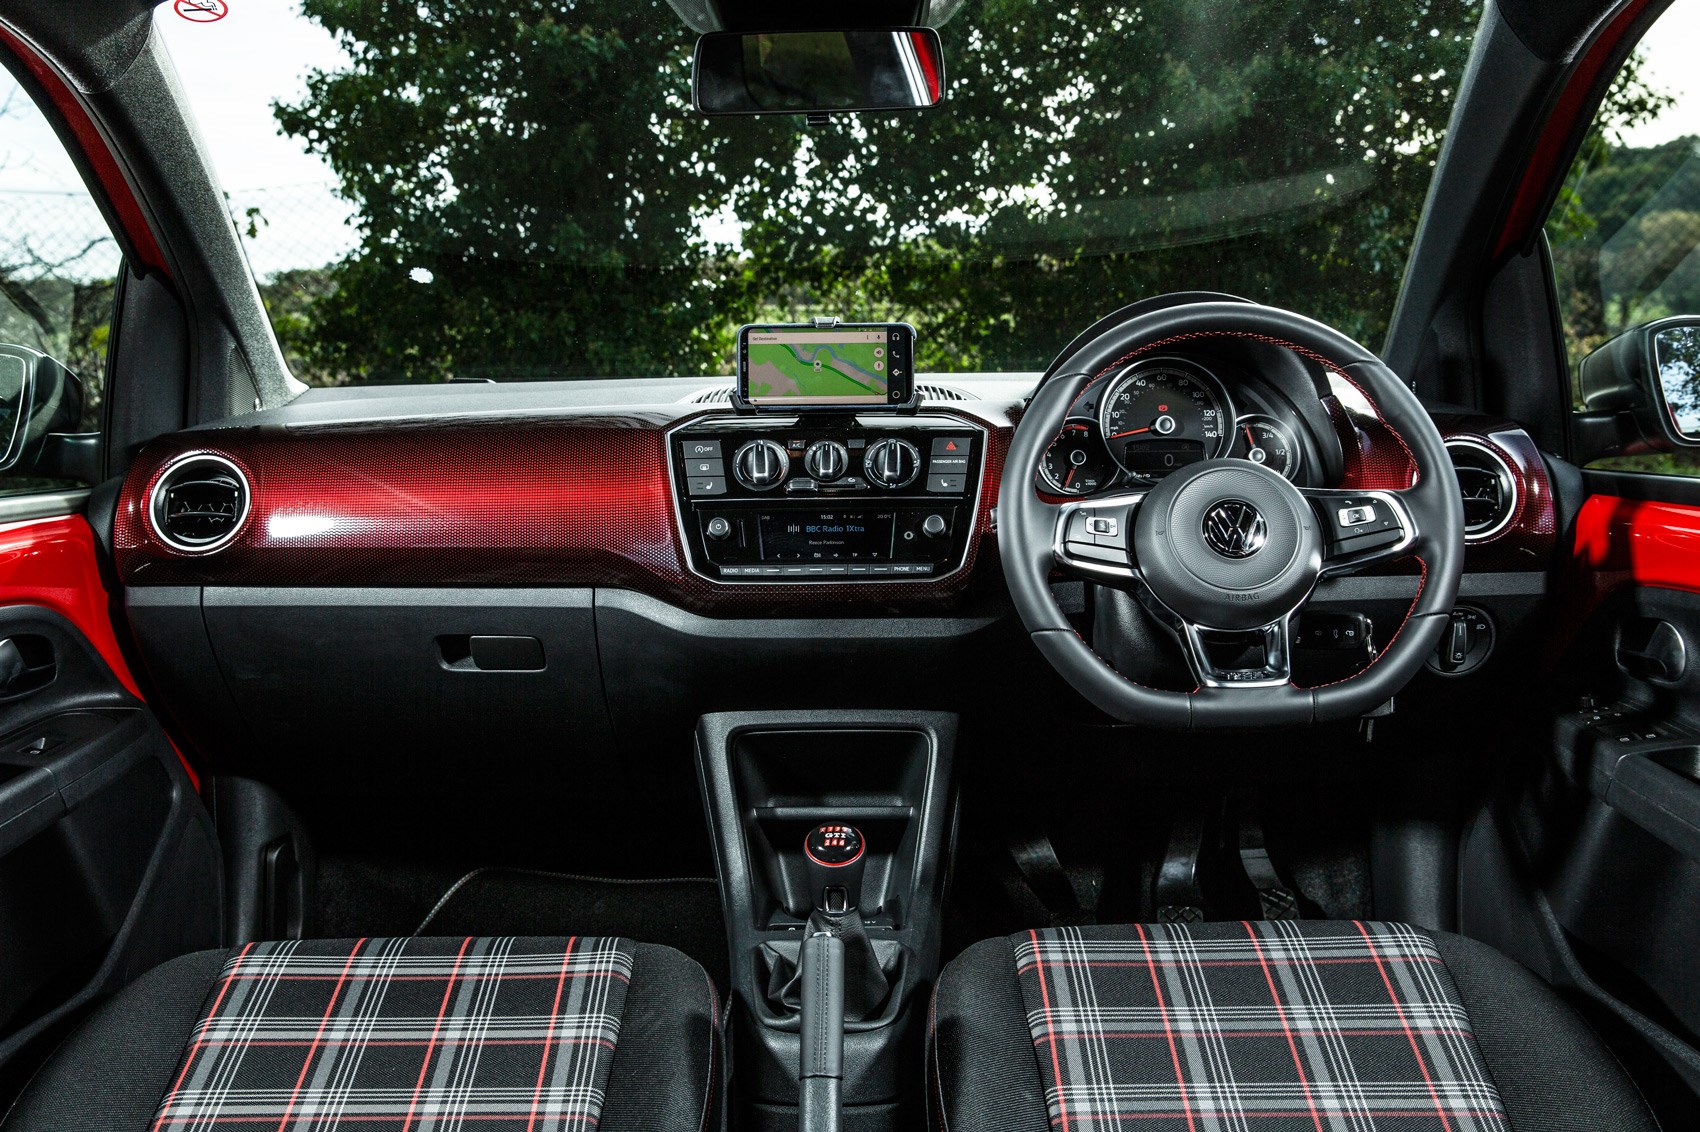 Volkswagen up! - Used Car Review